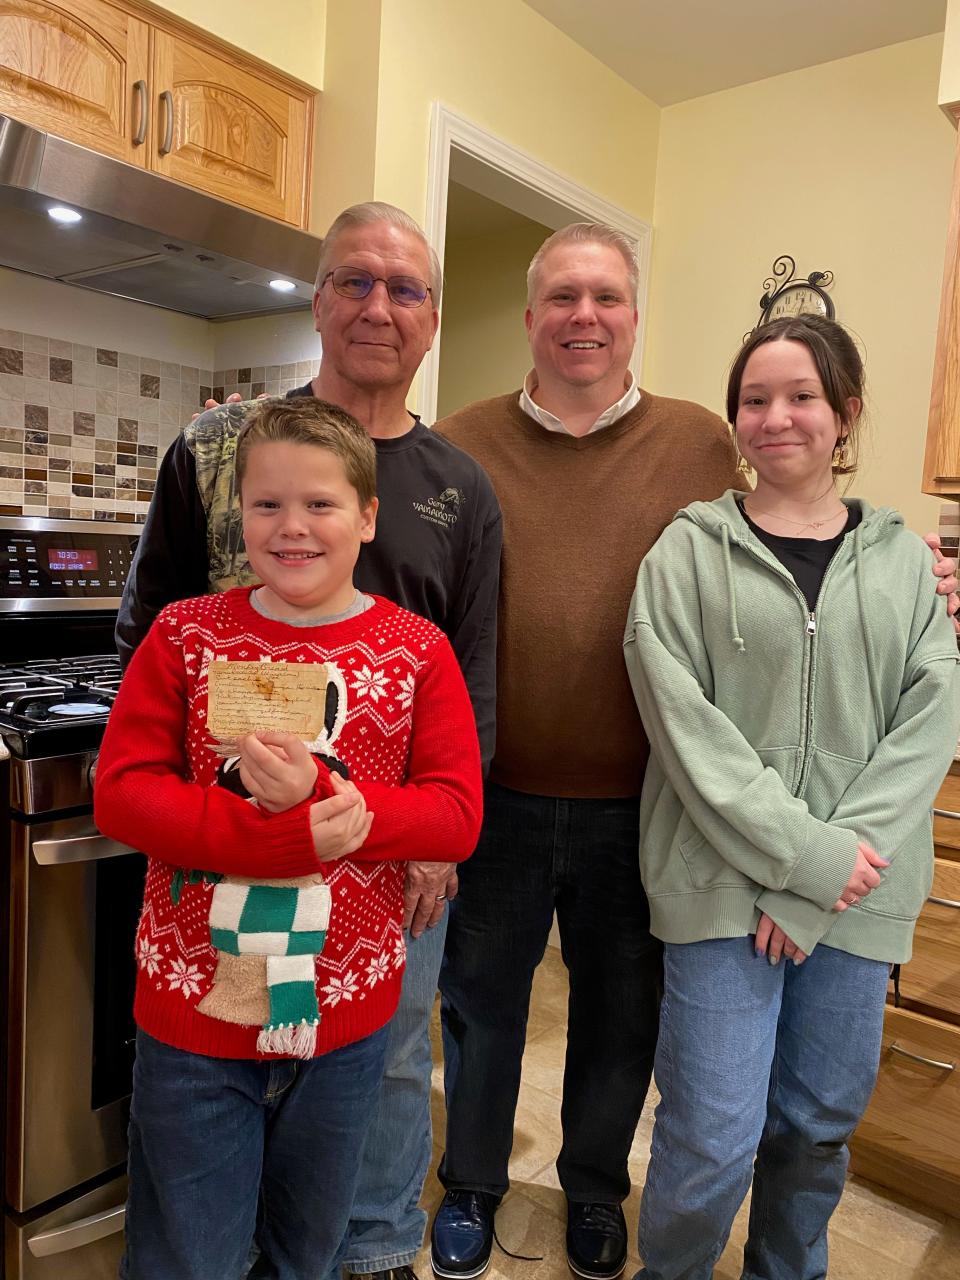 David Uhl, his father Larry Uhl, his daughter Samantha Uhl, and his son Ethan Uhl with Aunt Esther's monkey bread recipe.